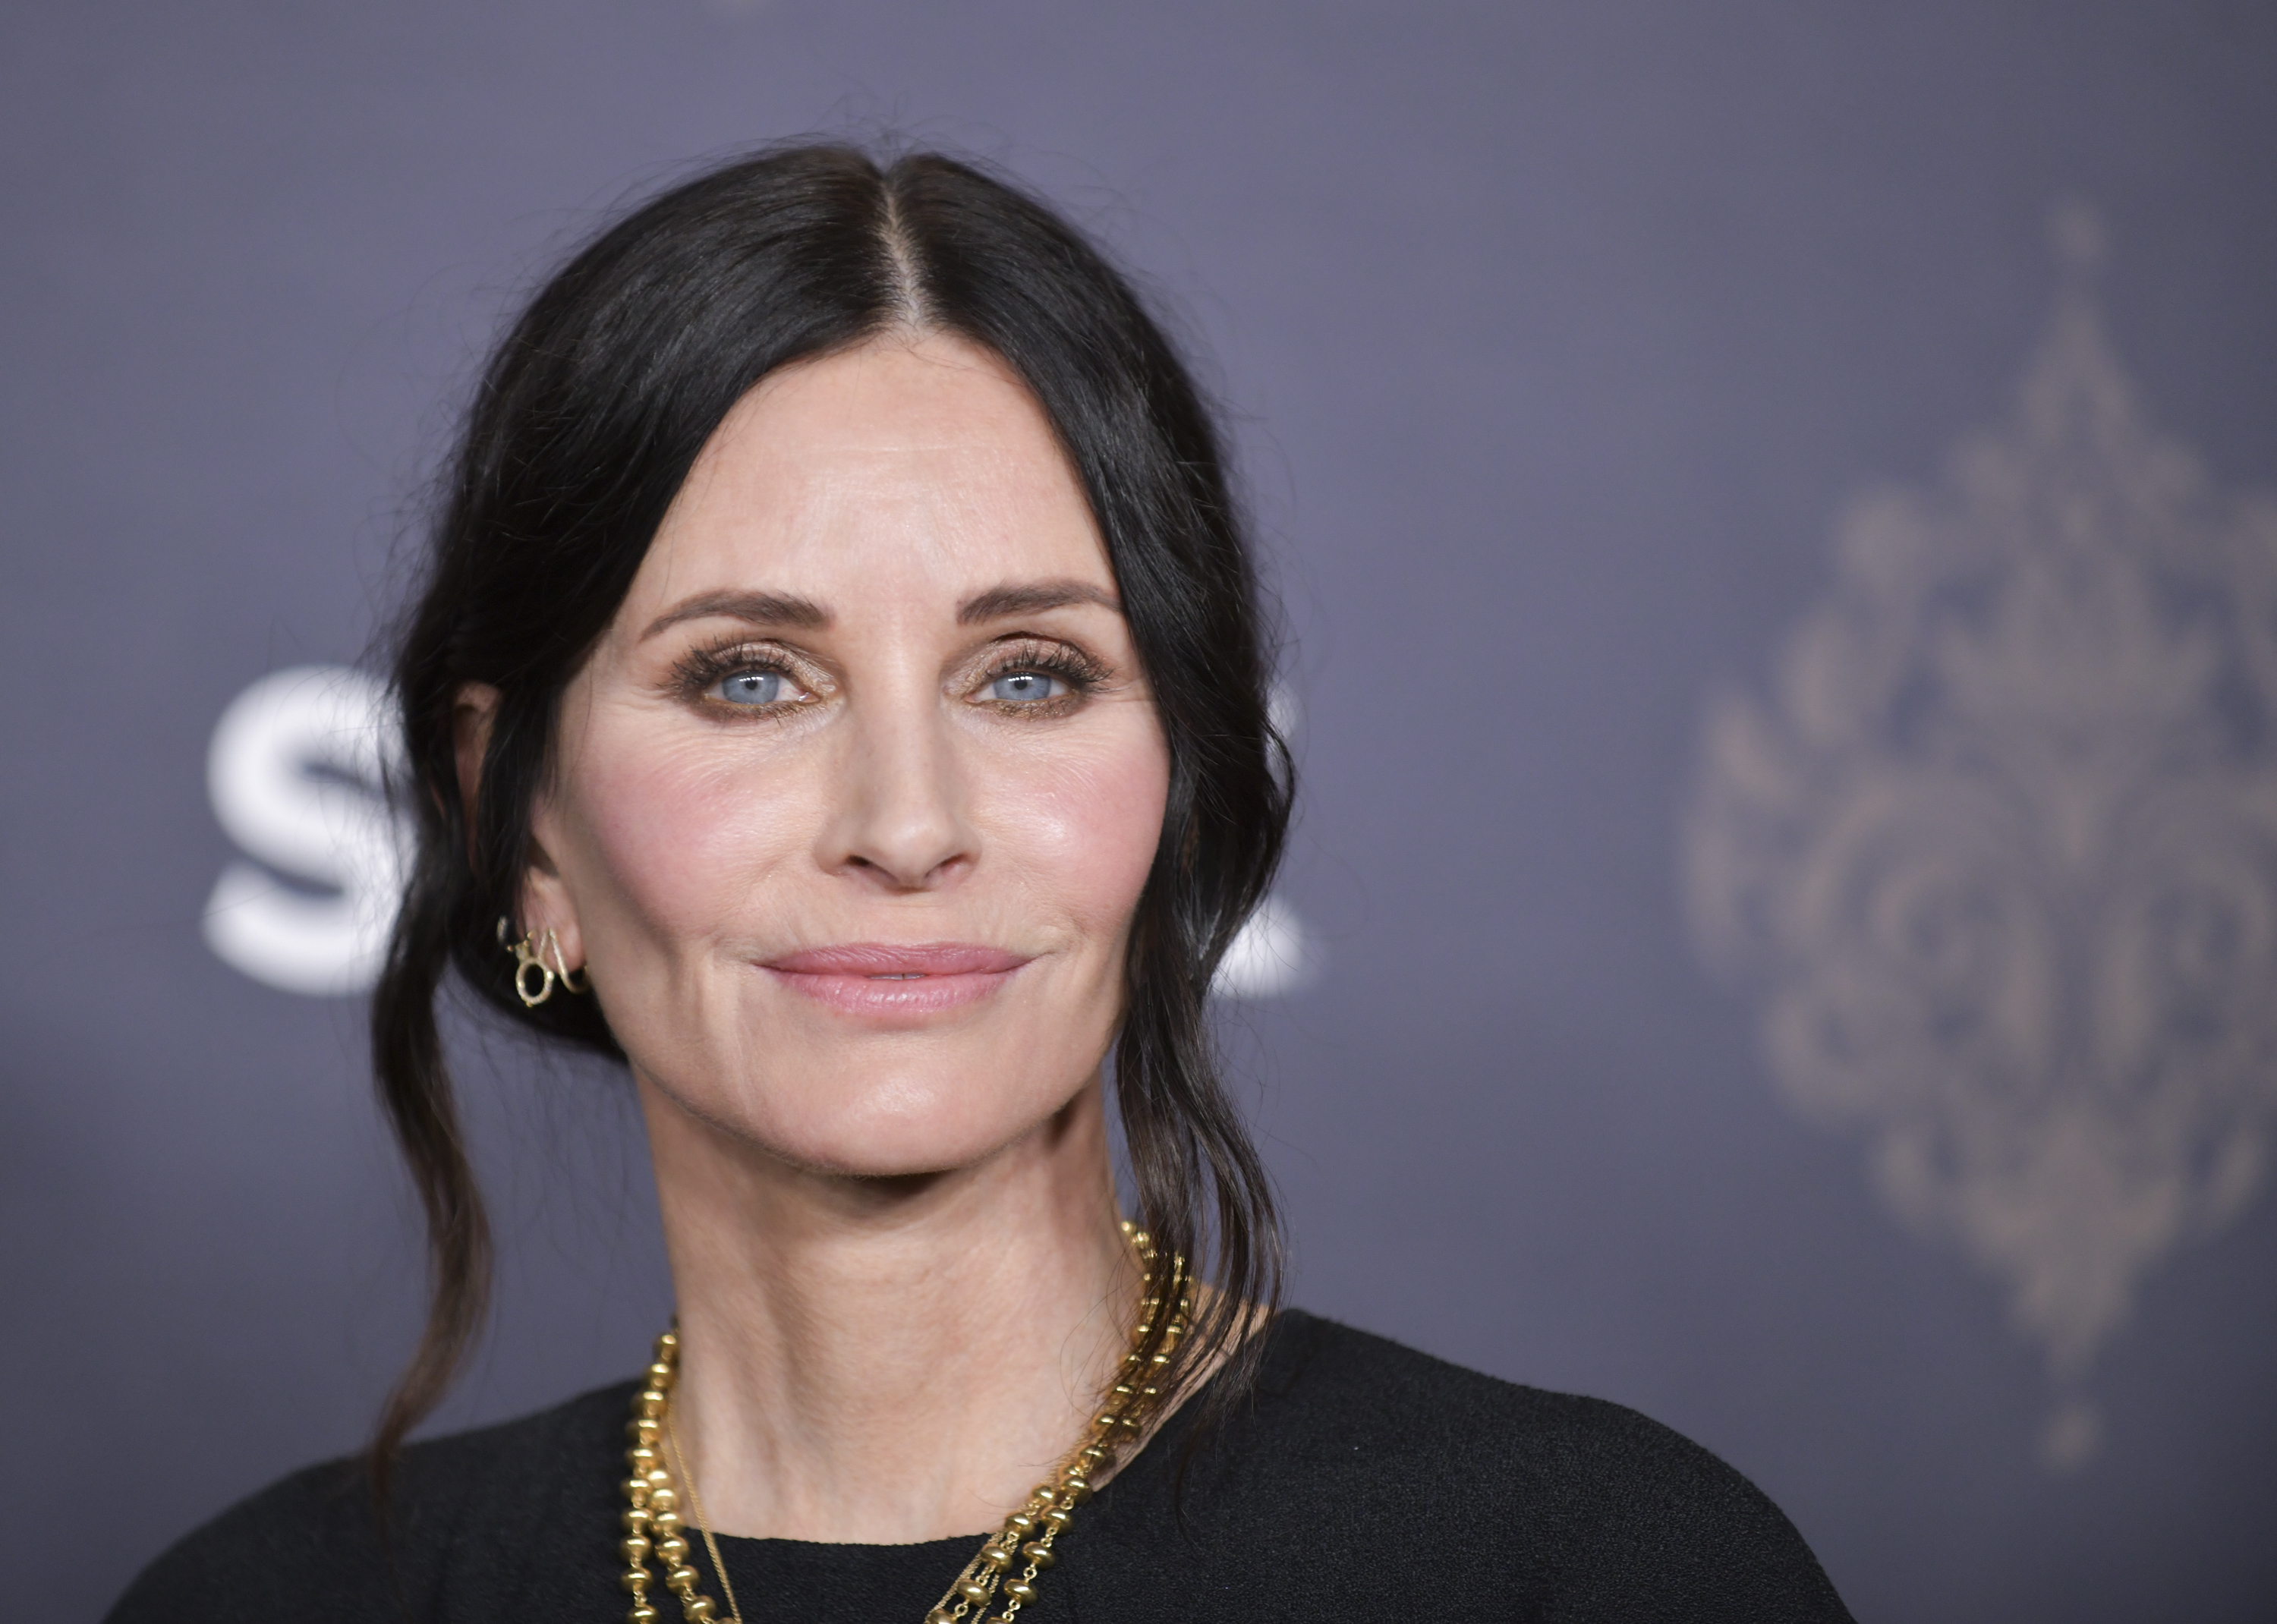 Courteney Cox attended the premiere of STARZ "Shining Vale" at TCL Chinese Theatre on February 28, 2022, in Hollywood, California. | Source: Getty Images